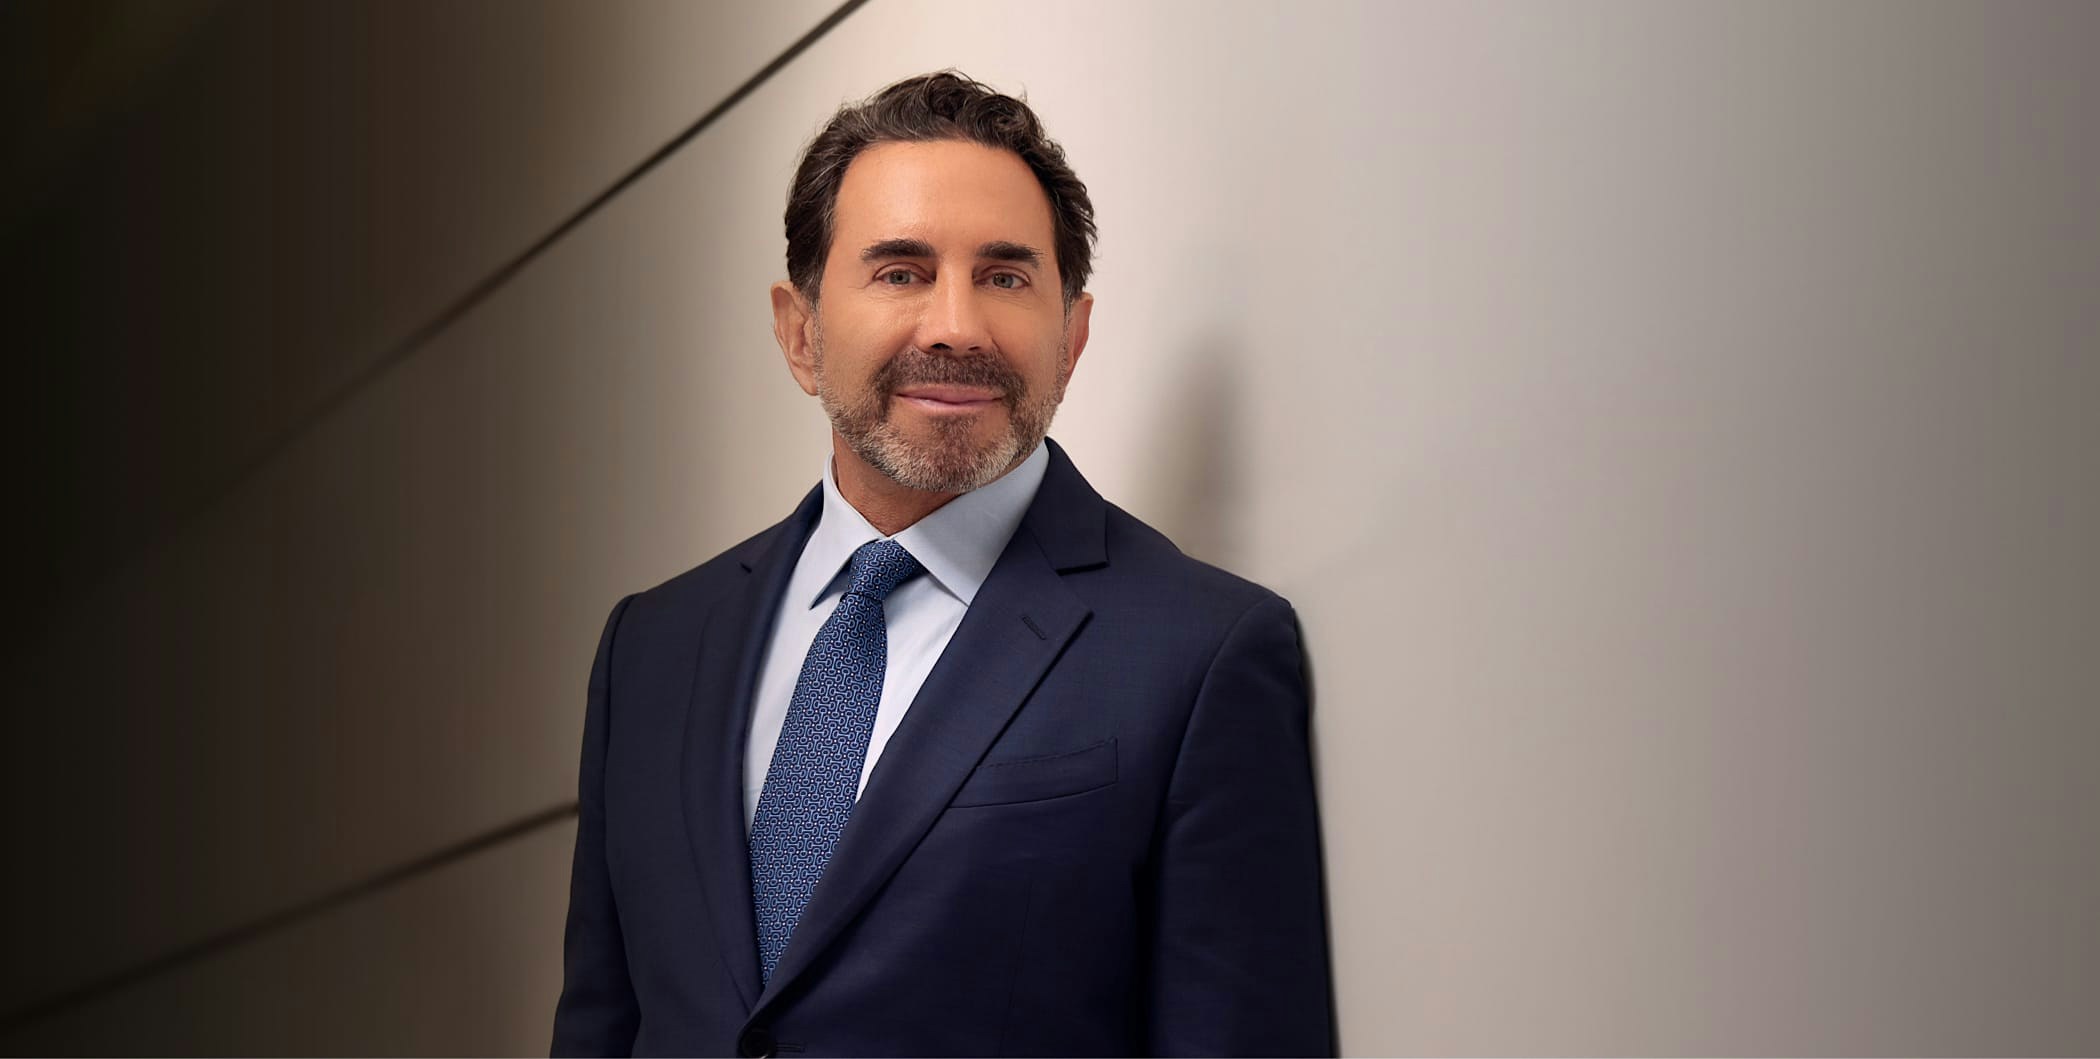 North-West College to Host First SUCCESS Talk Featuring Plastic Surgeon Dr. Paul  Nassif, Star of Botched on E! TV - Success Education Colleges